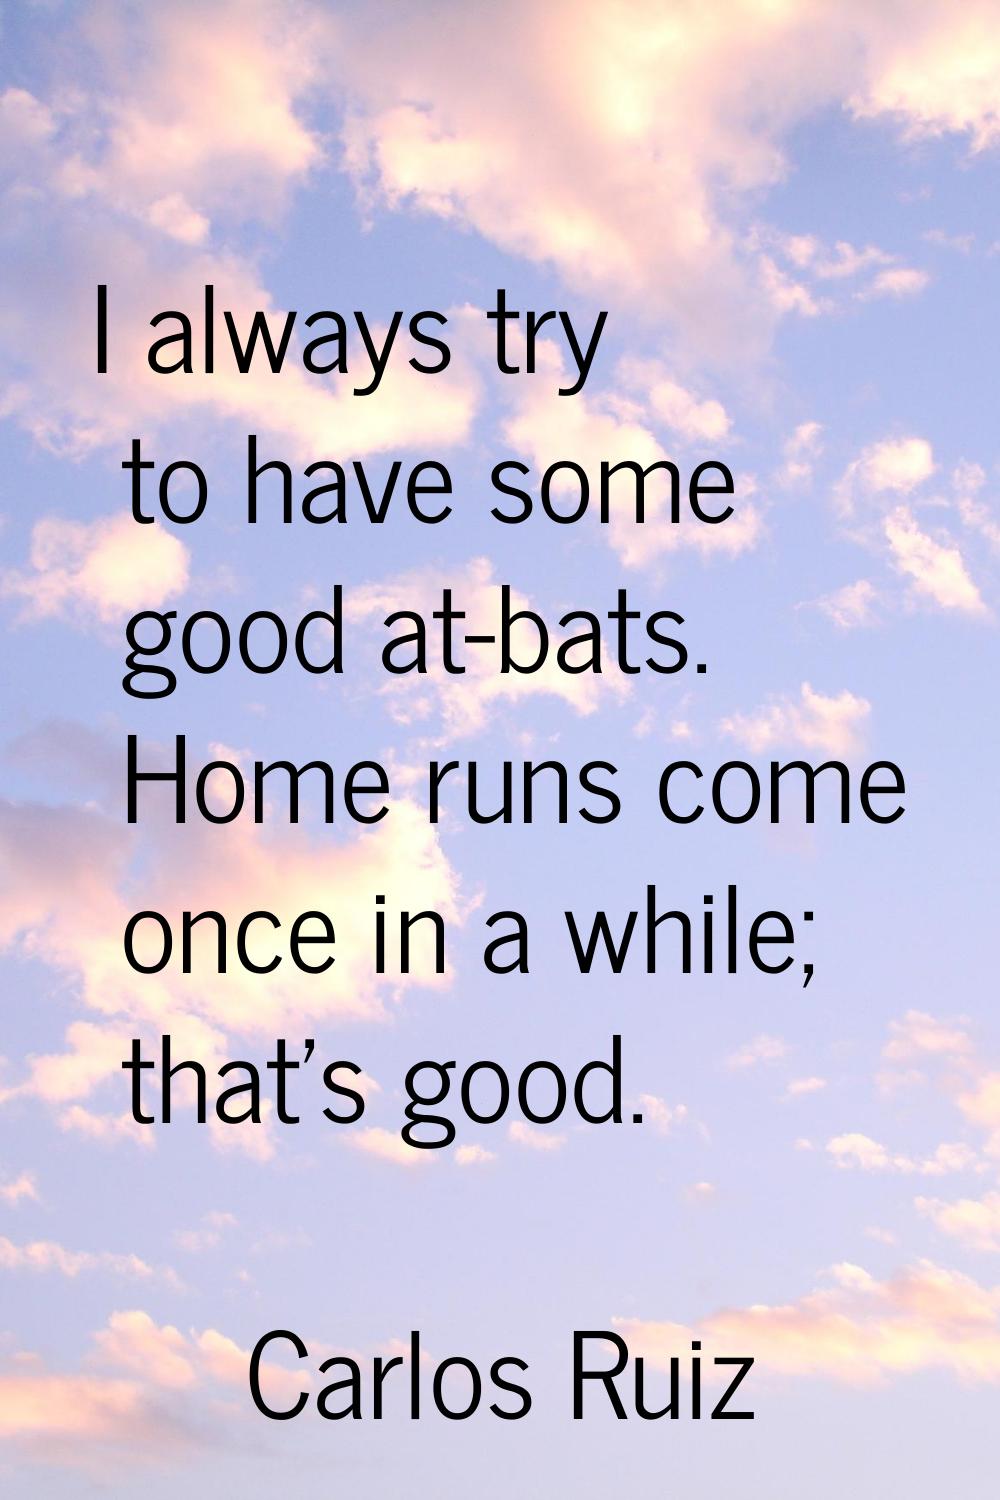 I always try to have some good at-bats. Home runs come once in a while; that's good.